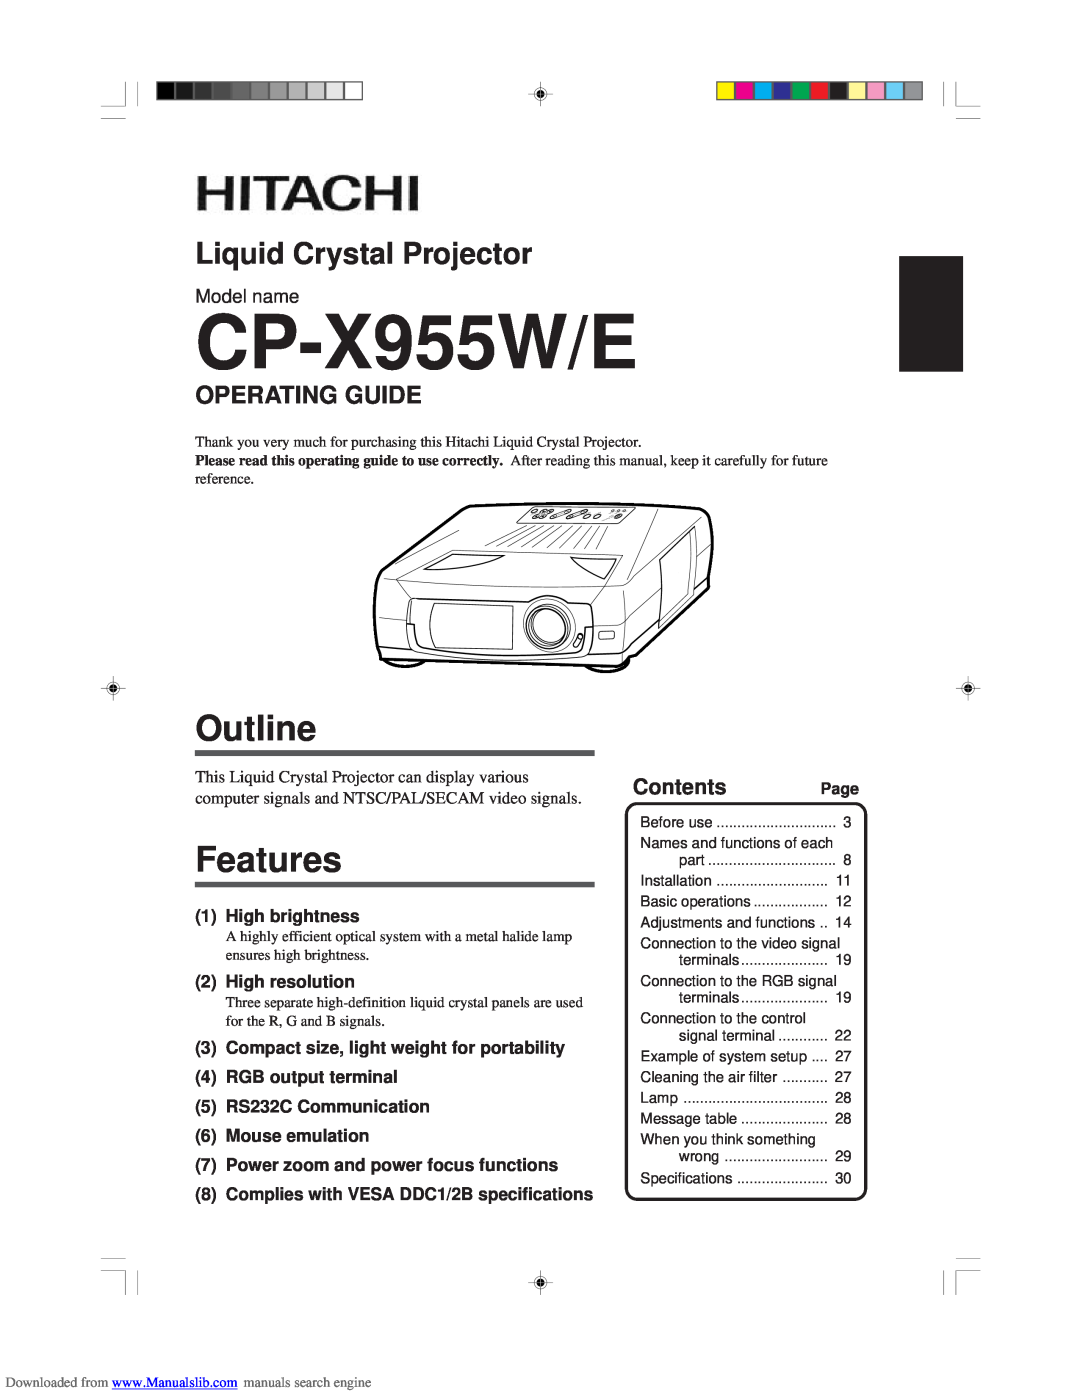 Hitachi CP-X955E specifications Outline, Features, Operating Guide, ContentsPage, High brightness, High resolution 